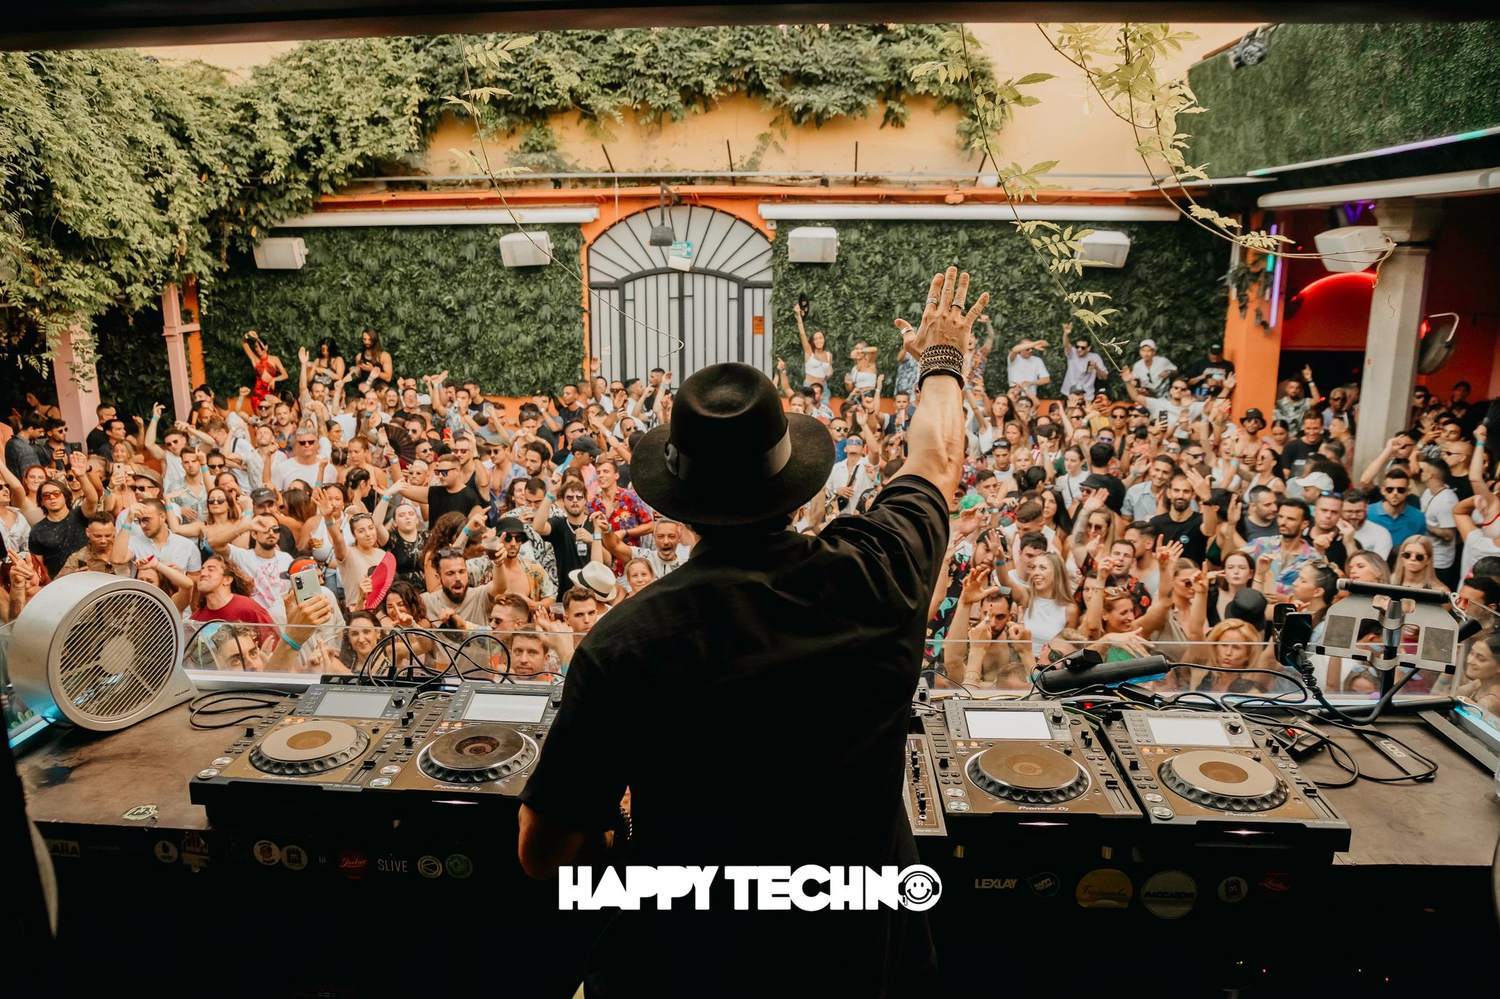 ***SOLD OUT*** HappyTechno Open Air / Daytime with Mihalis Safras, Lexlay at La Terrrazza - Página trasera